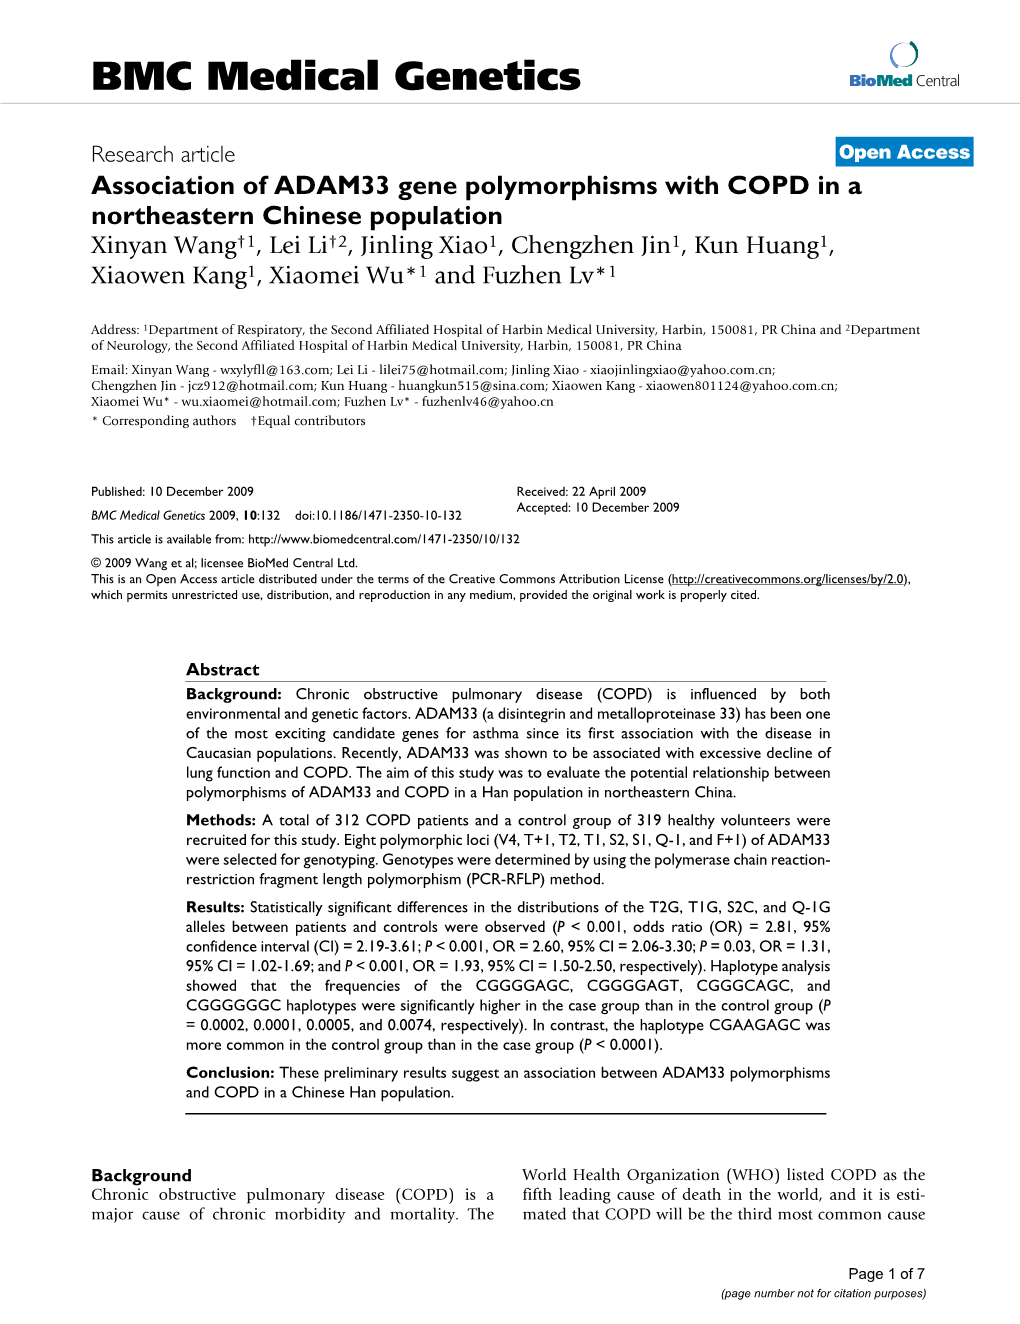 Association of ADAM33 Gene Polymorphisms with COPD in A